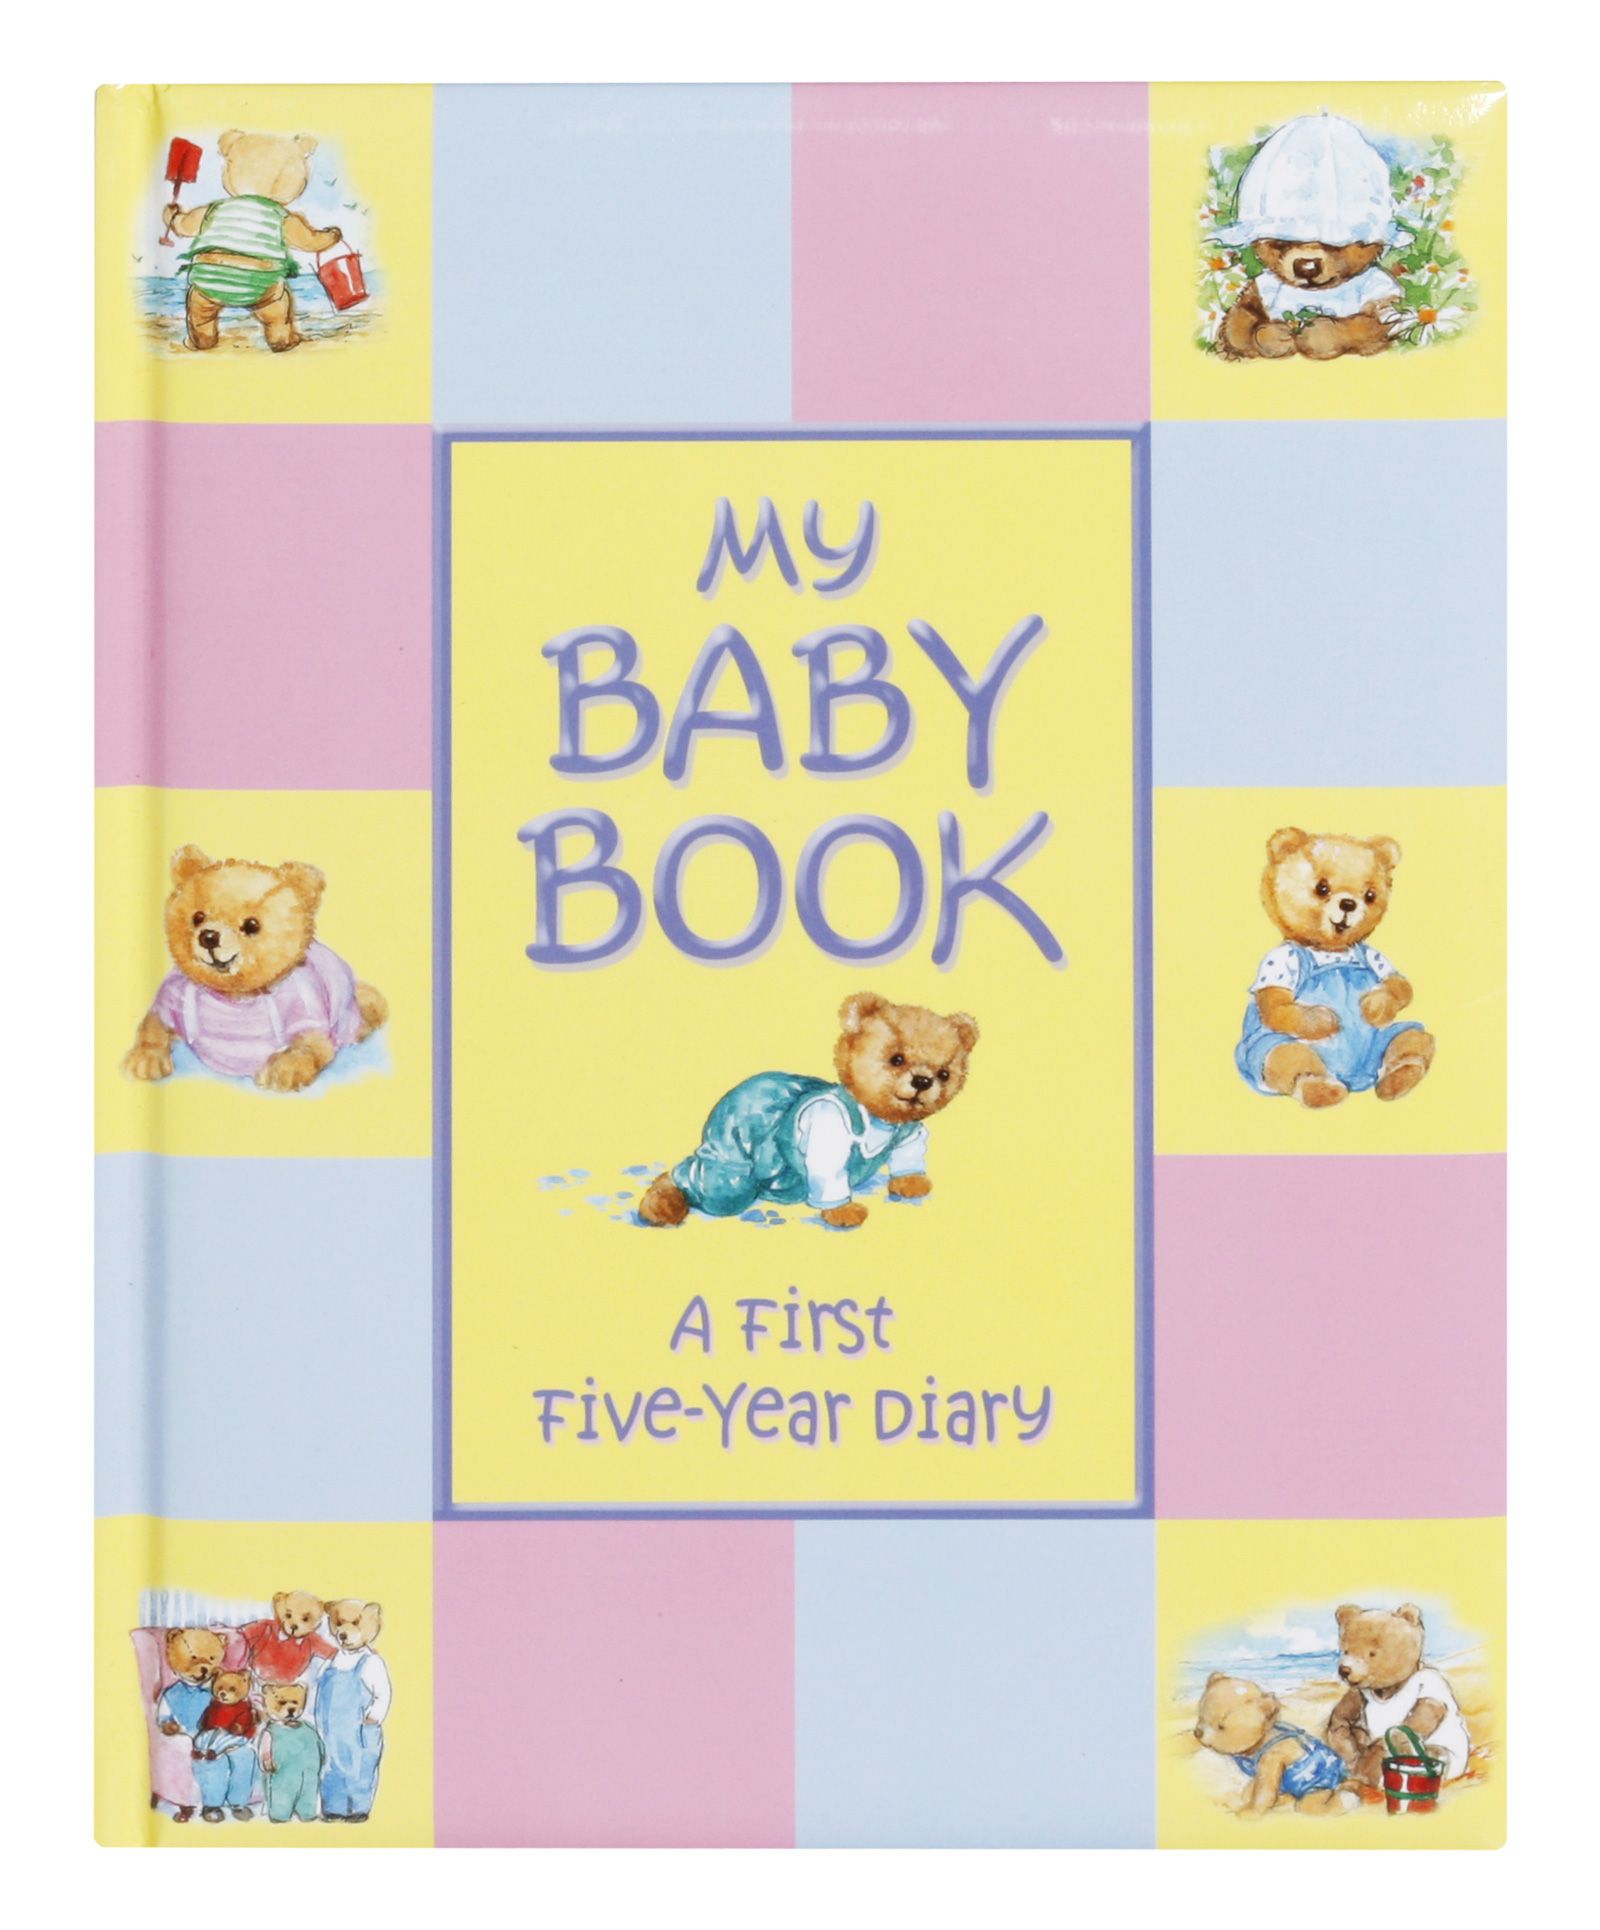 My Baby Book - A First Five-Year Diary